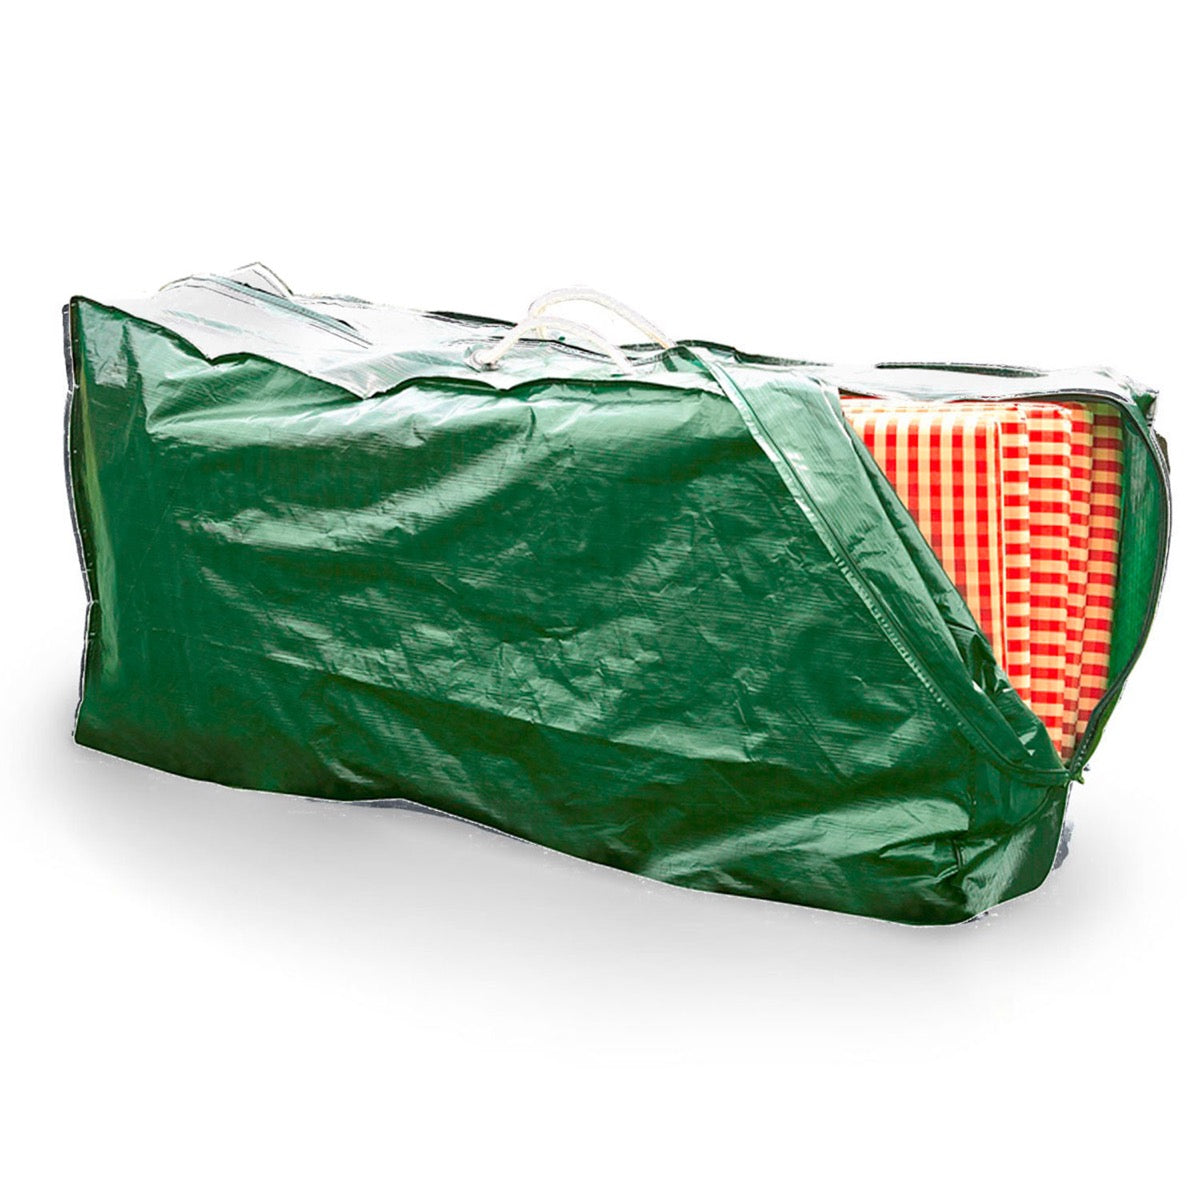 Rainexo protection cover for seat cushion - green